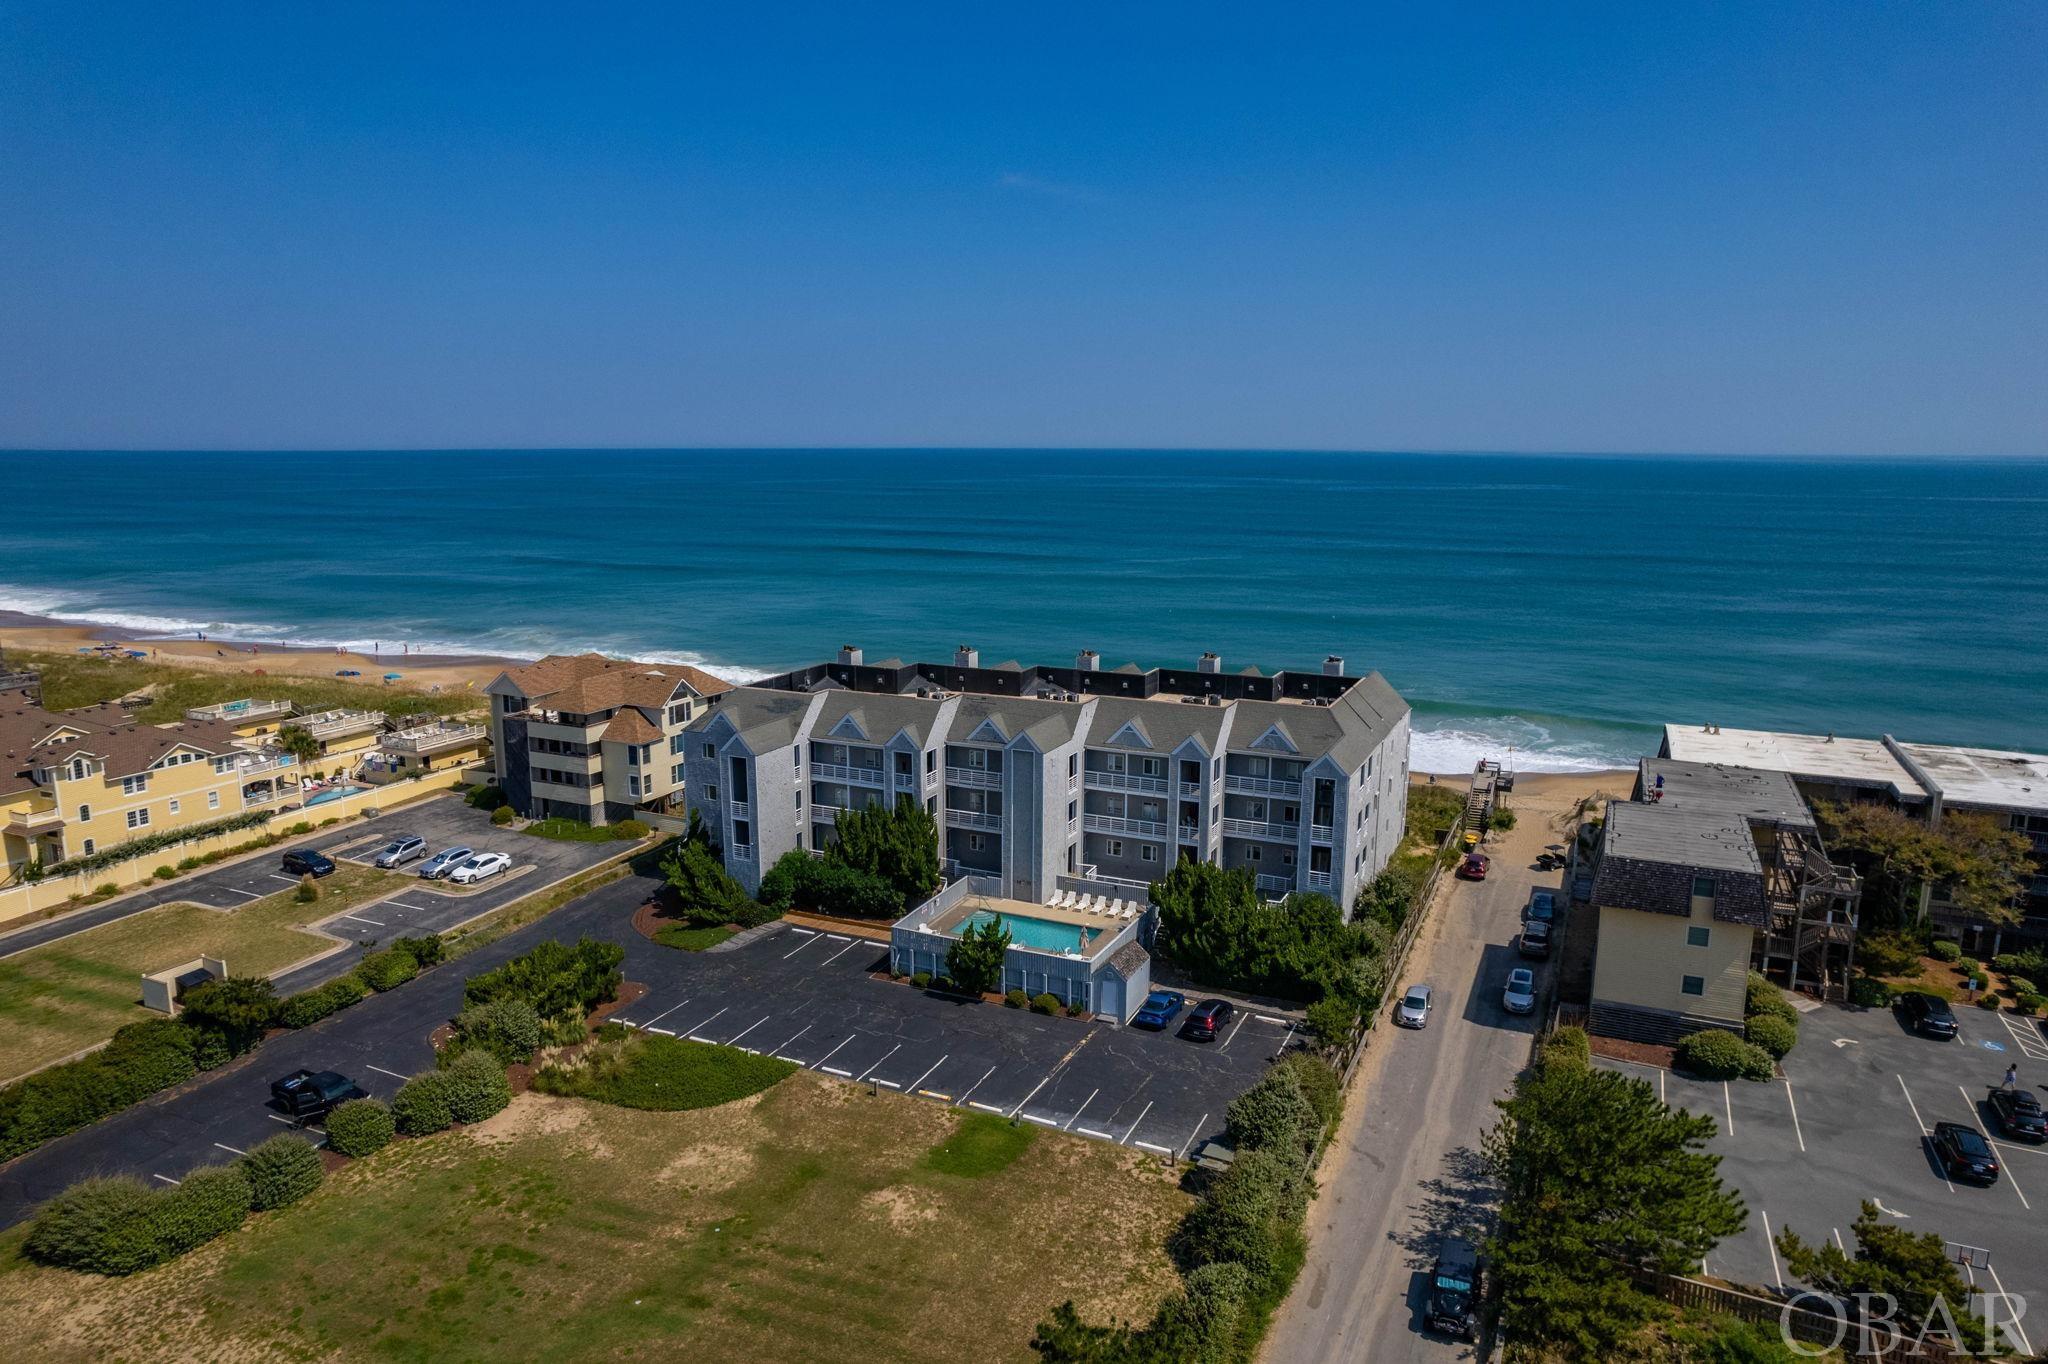 Oceanfront, Oceanfront, Oceanfront...this is the perfect Outer Banks home, as a large (1,973 sf) 3 bedroom Luxury Oceanfront condo, with excellent ocean views, with the easiest & most direct beach access you will find, beautifully remodeled & with stylish furnishings and décor, providing high rental income if desired ($89k projected annual owners rents with full availability), all in the prestigious Crystal Shores Condo complex, offering a community pool, elevator, covered reserved garage parking, & centrally located! Enjoy the 32' wide private & covered oceanfront decking, with composite deck furniture, then literally walk 15' from your private deck steps directly to the steps to the beach.... and back and forth all day. Inside, you will find an opulent 1,973 sf design, offering a bright and open great room, featuring 9' ceilings, wood burning fireplace with custom mantle, and great ocean views through the 20 linear feet of 8' high oceanfront impact sliders and windows! Ocean views from the connected dining & kitchen areas as well, and from the large main primary bedroom, also with 8' high oceanfront impact slider and glass, and walk-in closet. 2 comfortable sized bedrooms, foyer, dedicated interior laundry room, and lots of storage round out this floor.  Very comfortable and stylish floorplan, diagram in photos. This 2021 remodeled home features all new flooring, granite counter tops, modern wood kitchen cabinets, stainless steel appliances 2021, furnishings, décor, modern bath vanities 2021, high quality window treatments 2021, 2021 bedroom windows, 2015 oceanfront glass and sliders, 2021 HVAC system & water heater, 2022 washer and dryer, among many other upgrades, all to the benefit of the new owners. This stylish home offers high quality and attractive furnishings, décor, artwork, and  window treatments, including floor to ceiling drapes along the oceanfront, blackout drapes in bedroom, 4 mounted TV's, fully stocked kitchen with stone topped island and 4 top bar with stools, together with modern appliances and mechanicals, high end deck furniture front and rear, this home is ready for immediate enjoyment. This property is offered furnished, with some exclusions of primarily living room furniture, exclusions list provided.  #103 is located in the middle of the first level, and the direct beach access cannot be overstated, will be appreciated daily, an easy skip to the beach and community grilling area, and to the garage and car with just one flight of stairs. This is a rare opportunity within the exclusive and closely held Crystal Shores community, with just 15 homeowners, many long term and 2nd home owners, offering a sturdy concrete structure, parking garage with reserved space, large garage area owners storage room, elevator, community pool, dune top community decking, all centrally located.  Take advantage of this unique opportunity and enjoy for personal use, and/or personal use along lucrative annual vacation rental income. This is a very popular vacation rental, excellent guest feedback, generating $70,000 advertised income in 2023 with owners personal use, in just 13 rental weeks! $89,770 projected rental owner income for 2024 with full availability (rental reports and projections available).  Well established and well run community.  Schedule your virtual or in person showing today. The owners have very much enjoyed this home, but are prepared to pass along to a new family to do the same. Additional photos, cut and paste: https://www.mylisting.cloud/sites/drkabrl/unbranded#&gid=1&pid=1